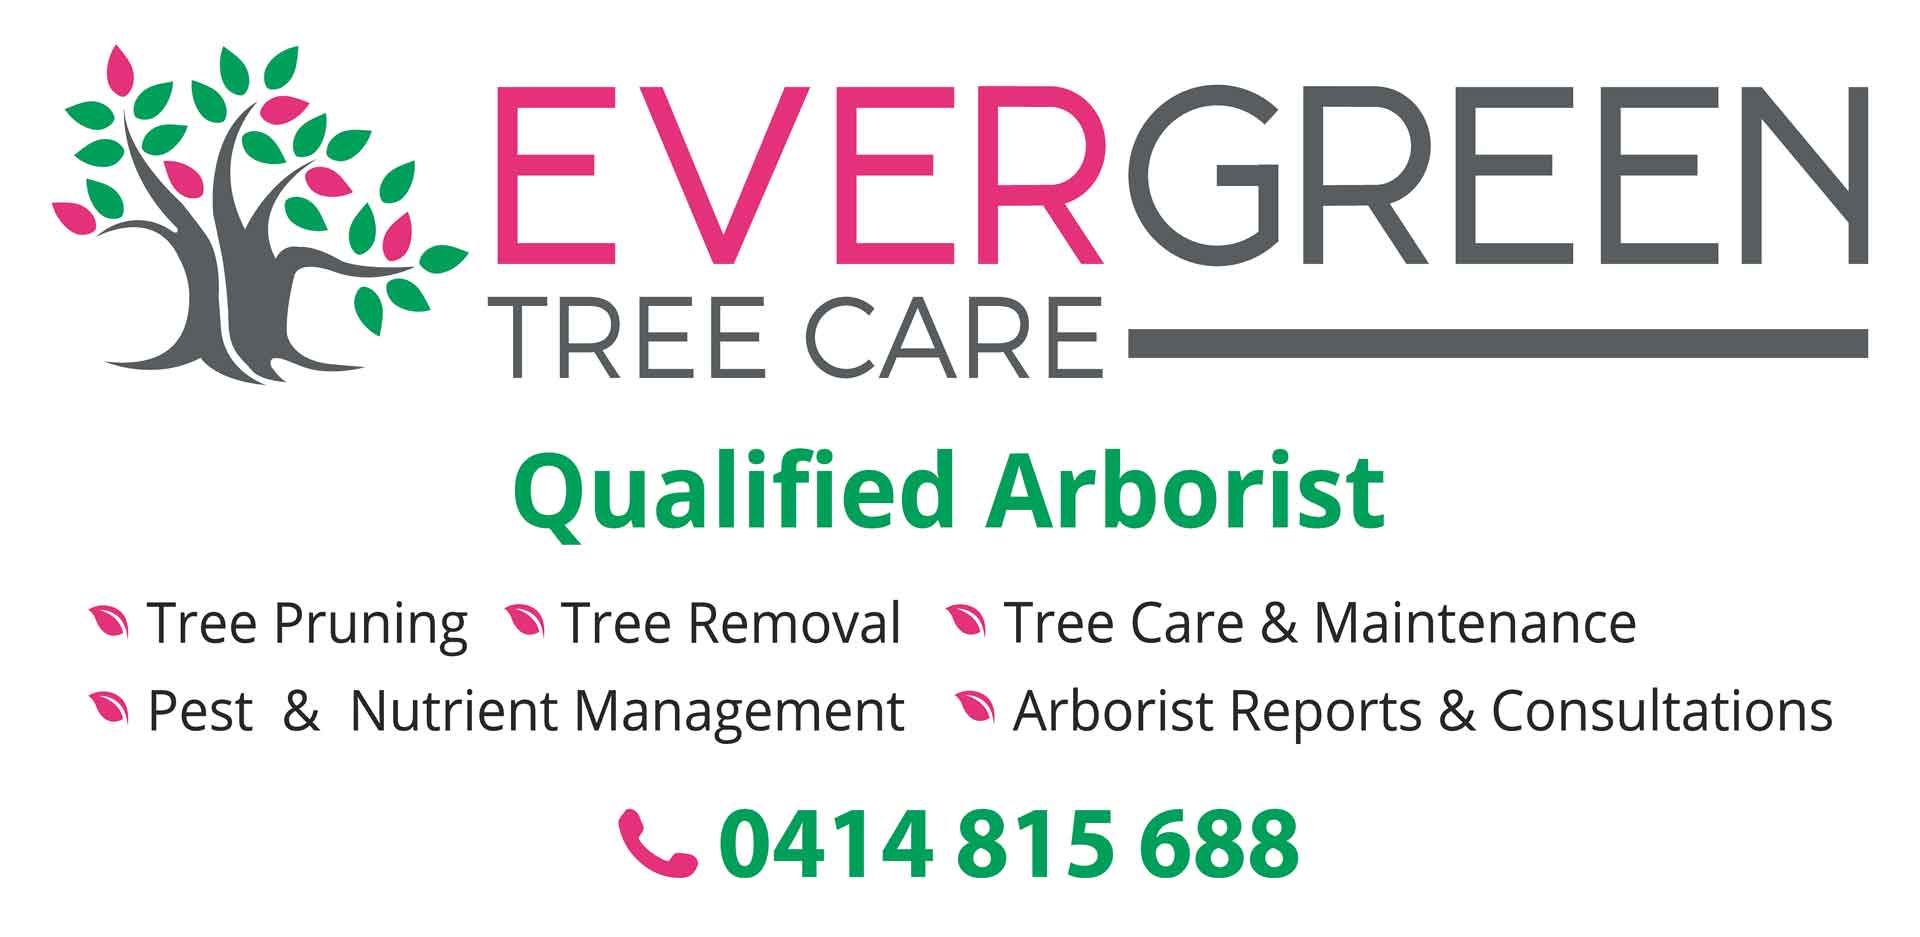 Evergreen tree care manages the urban forest of Brisbane. Qualified arborists.